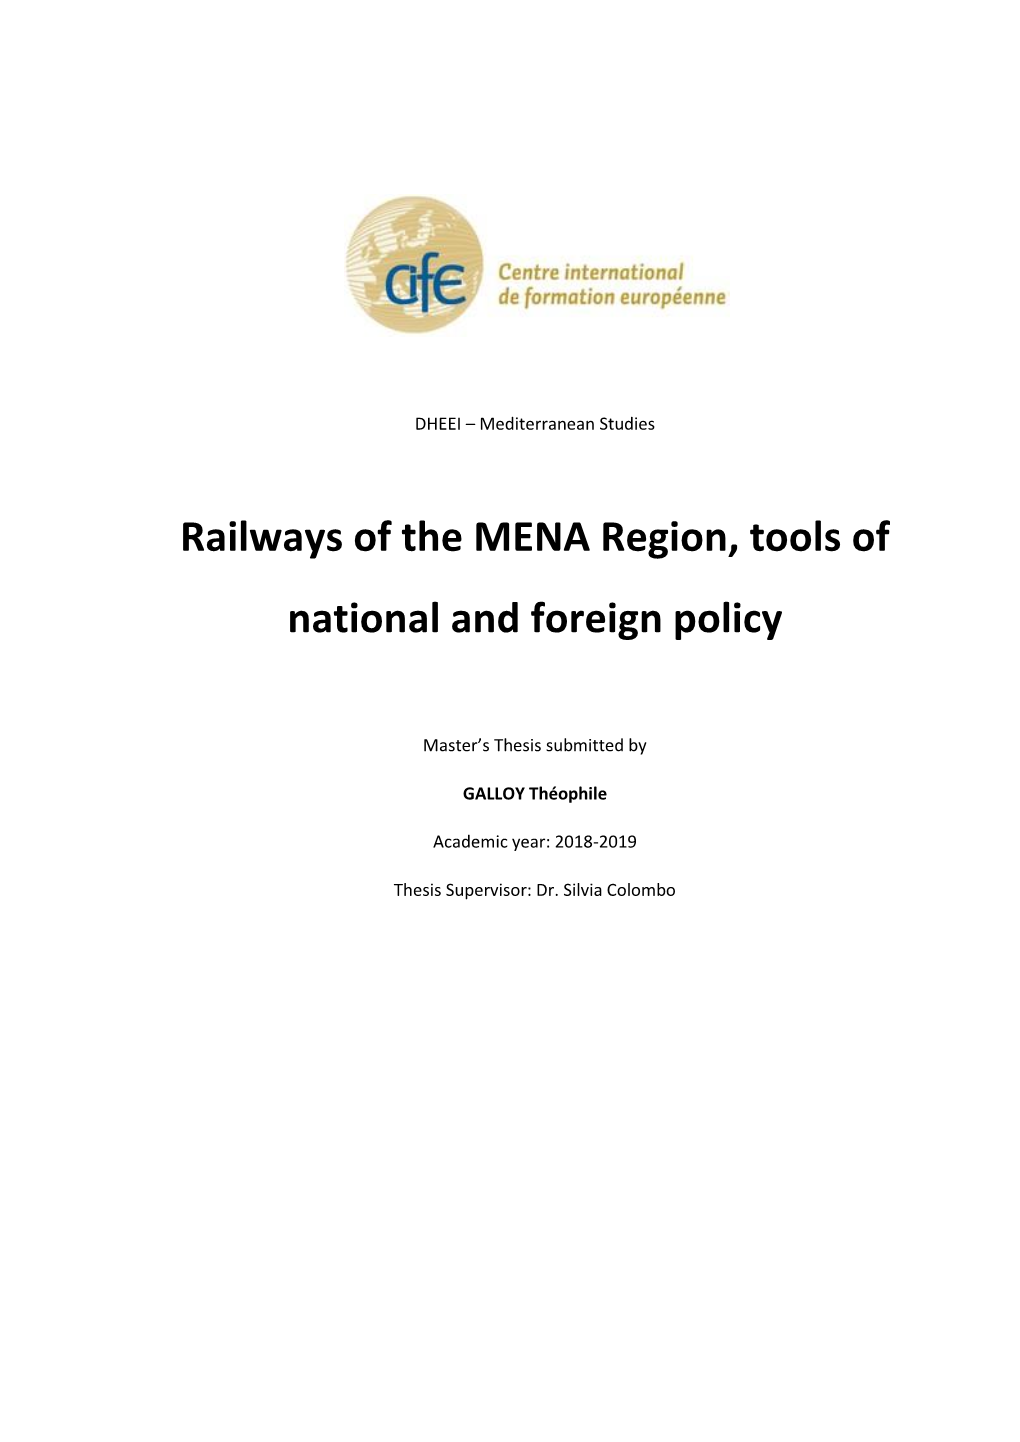 Railways of the MENA Region, Tools of National and Foreign Policy